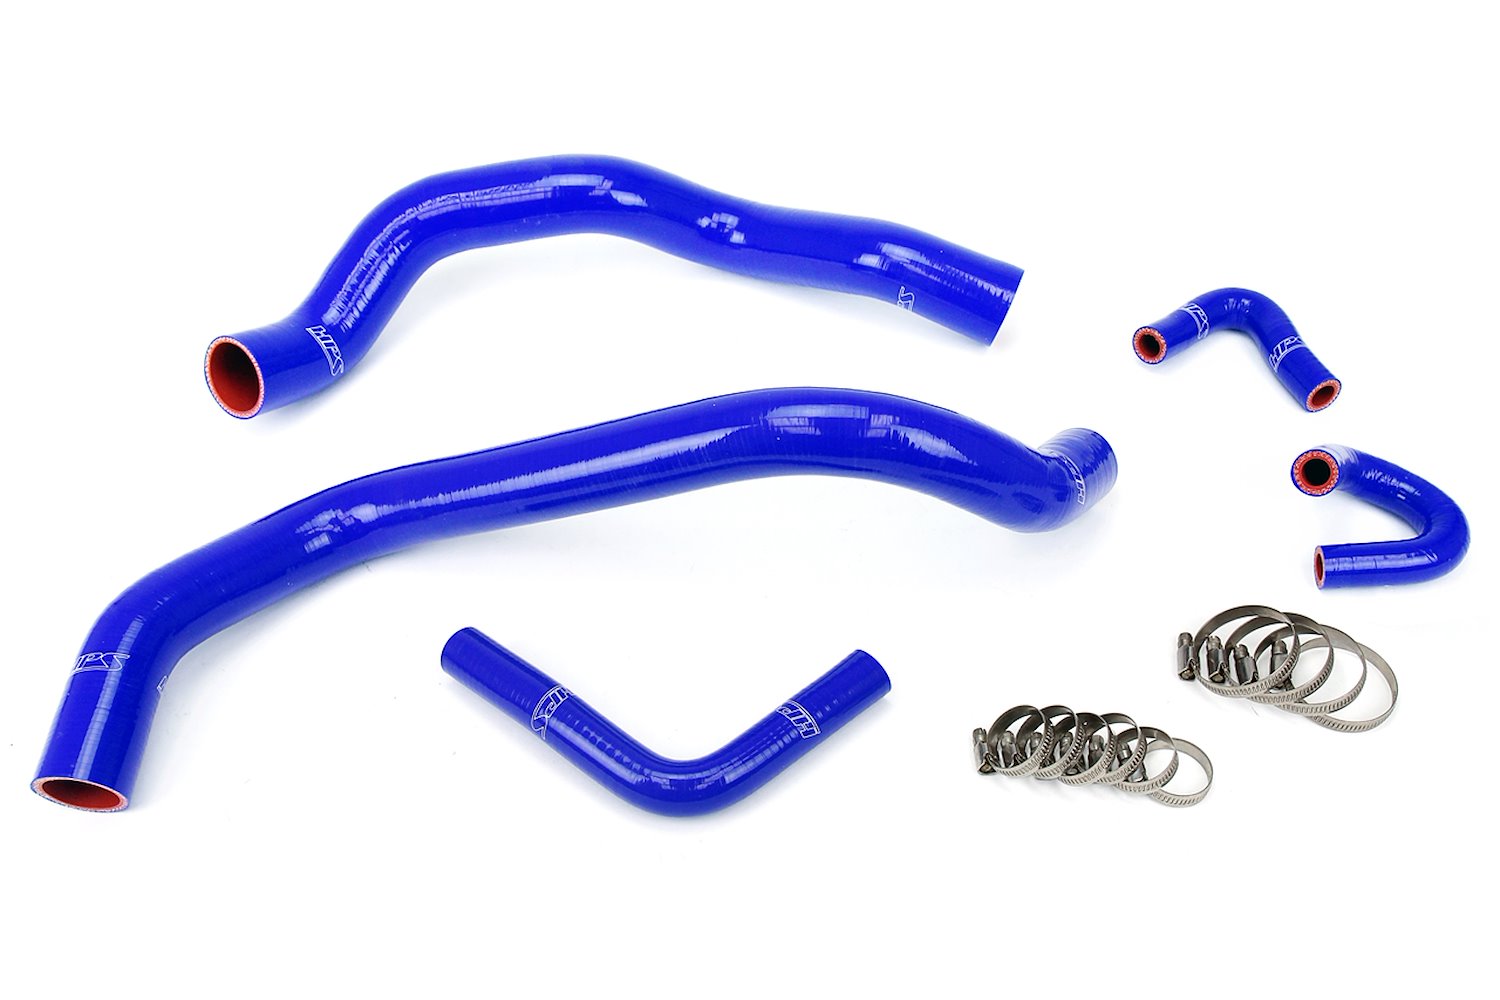 57-1401-BLUE Coolant Hose Kit, High-Temp 3-Ply Reinforced Silicone, Replace Rubber Radiator Heater Coolant Hoses